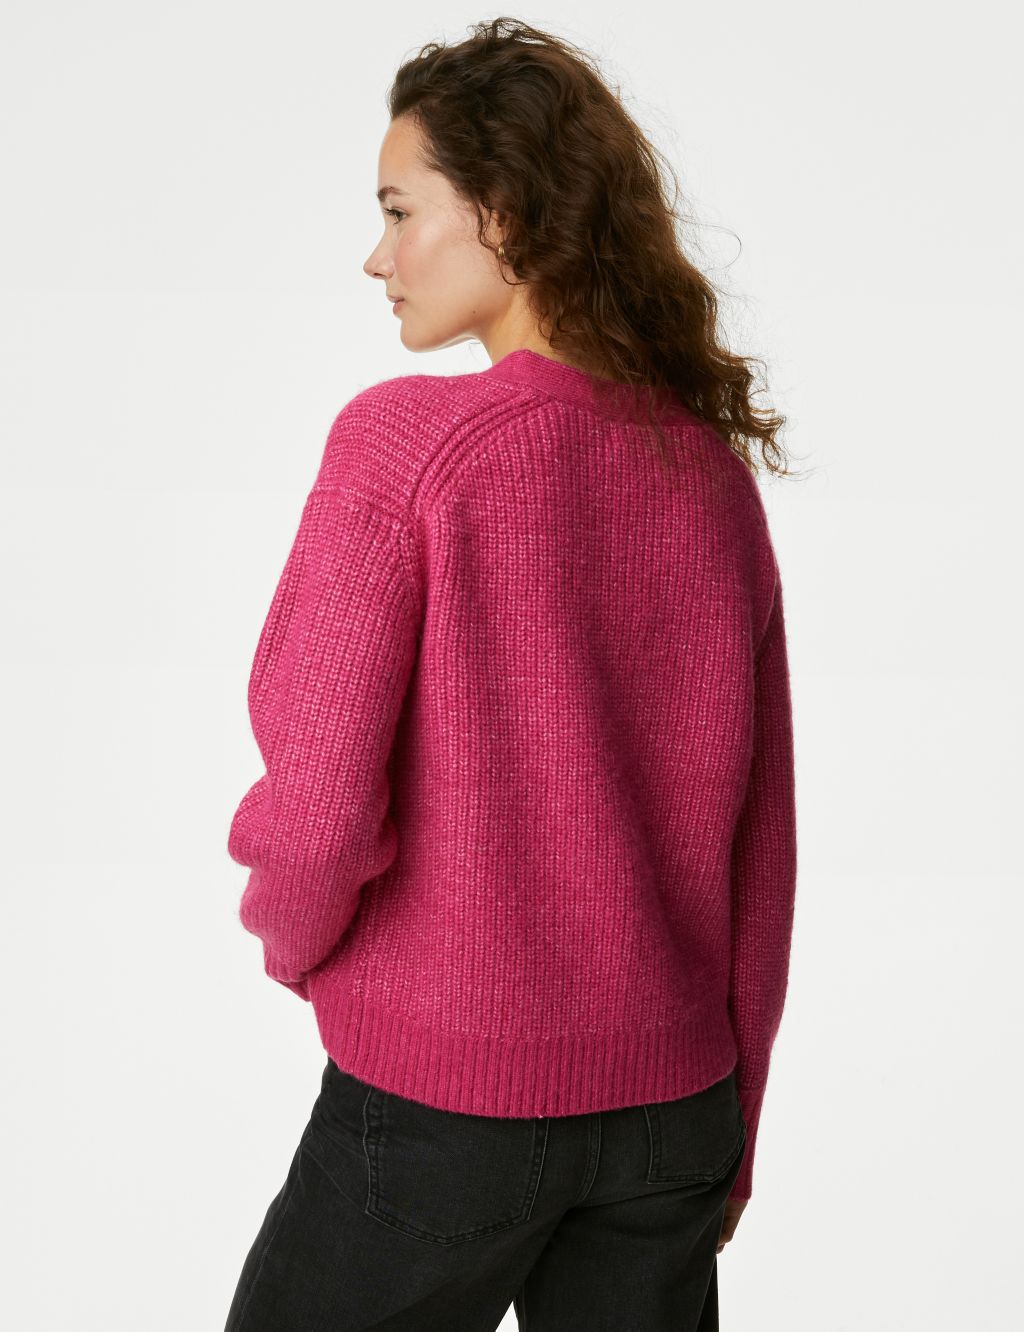 Knitted V-Neck Relaxed Cardigan with Wool image 5